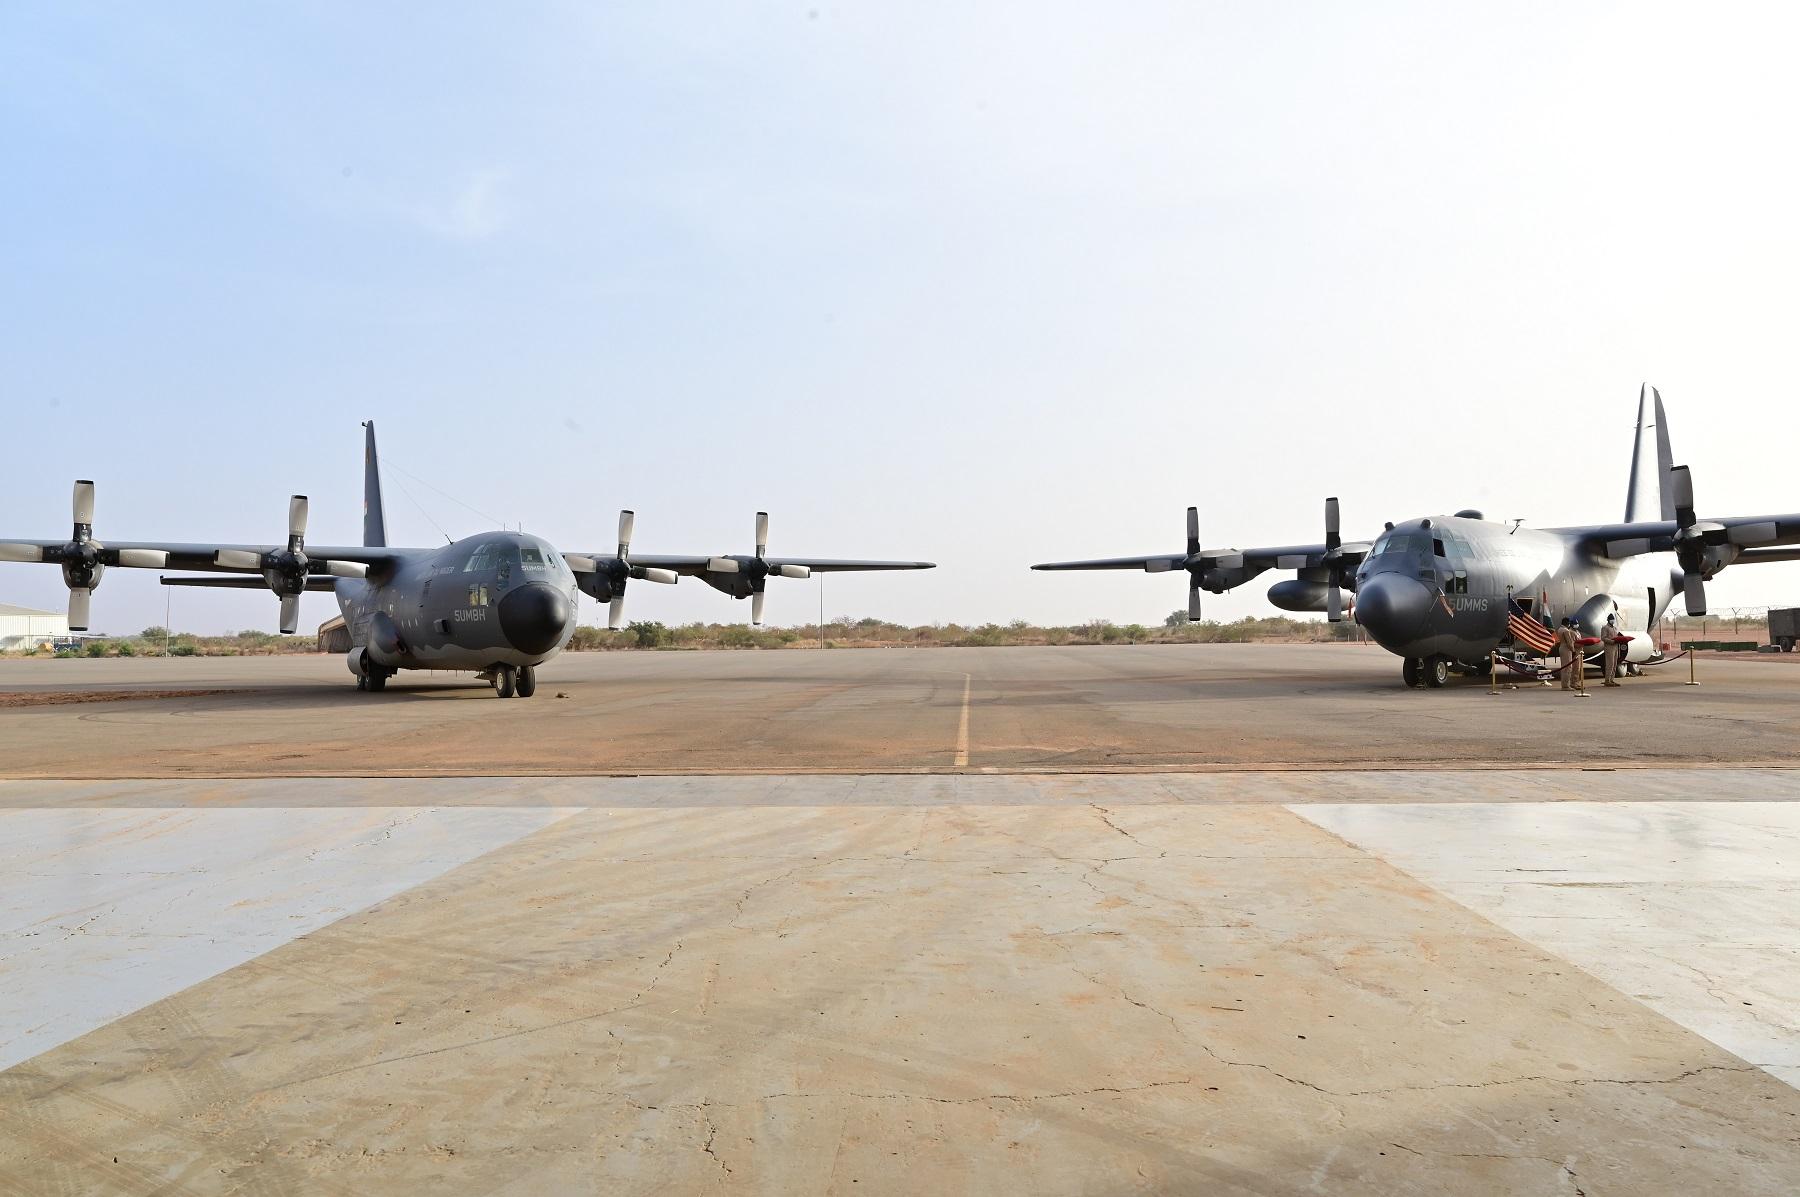 Nigerian Air Force Receives Second C-130 to Support Enduring Sahel Operations